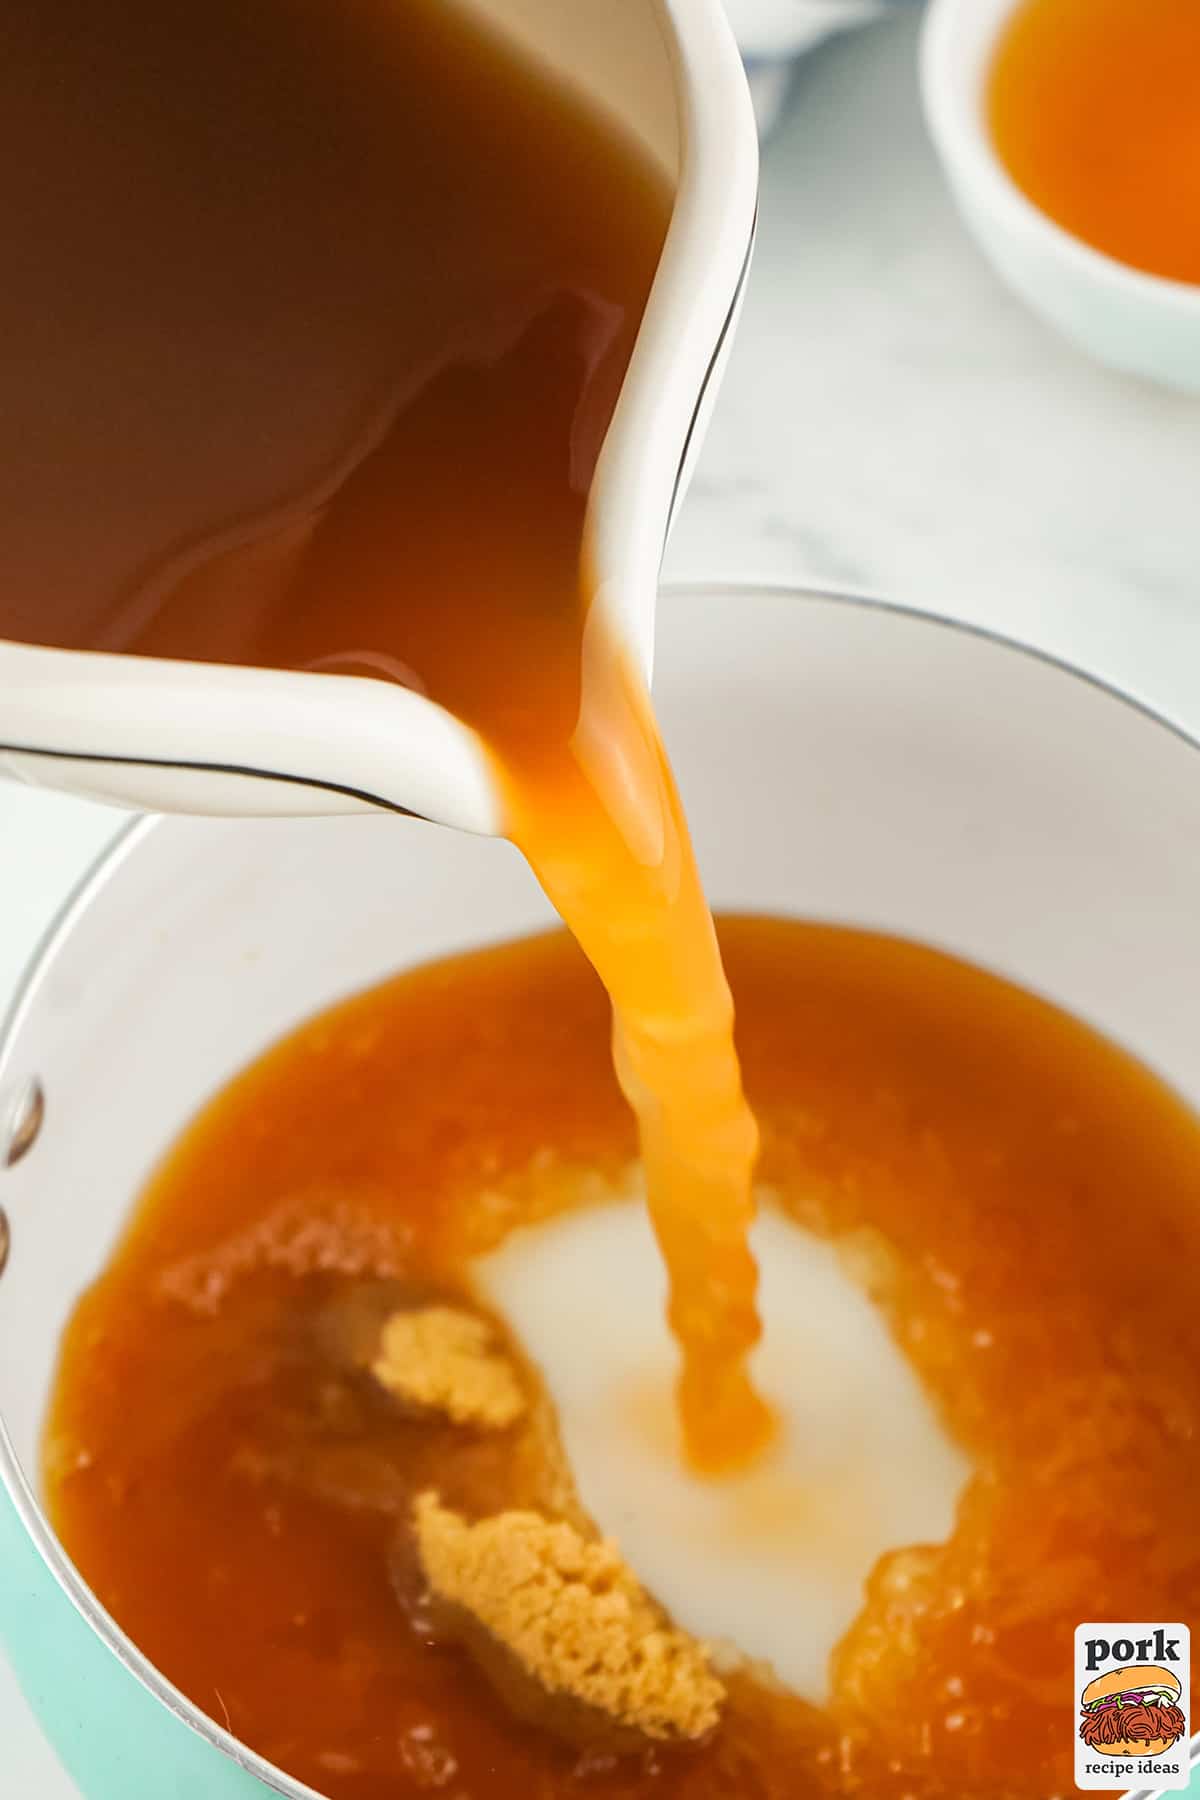 apple cider vinegar being poured into a saucepan